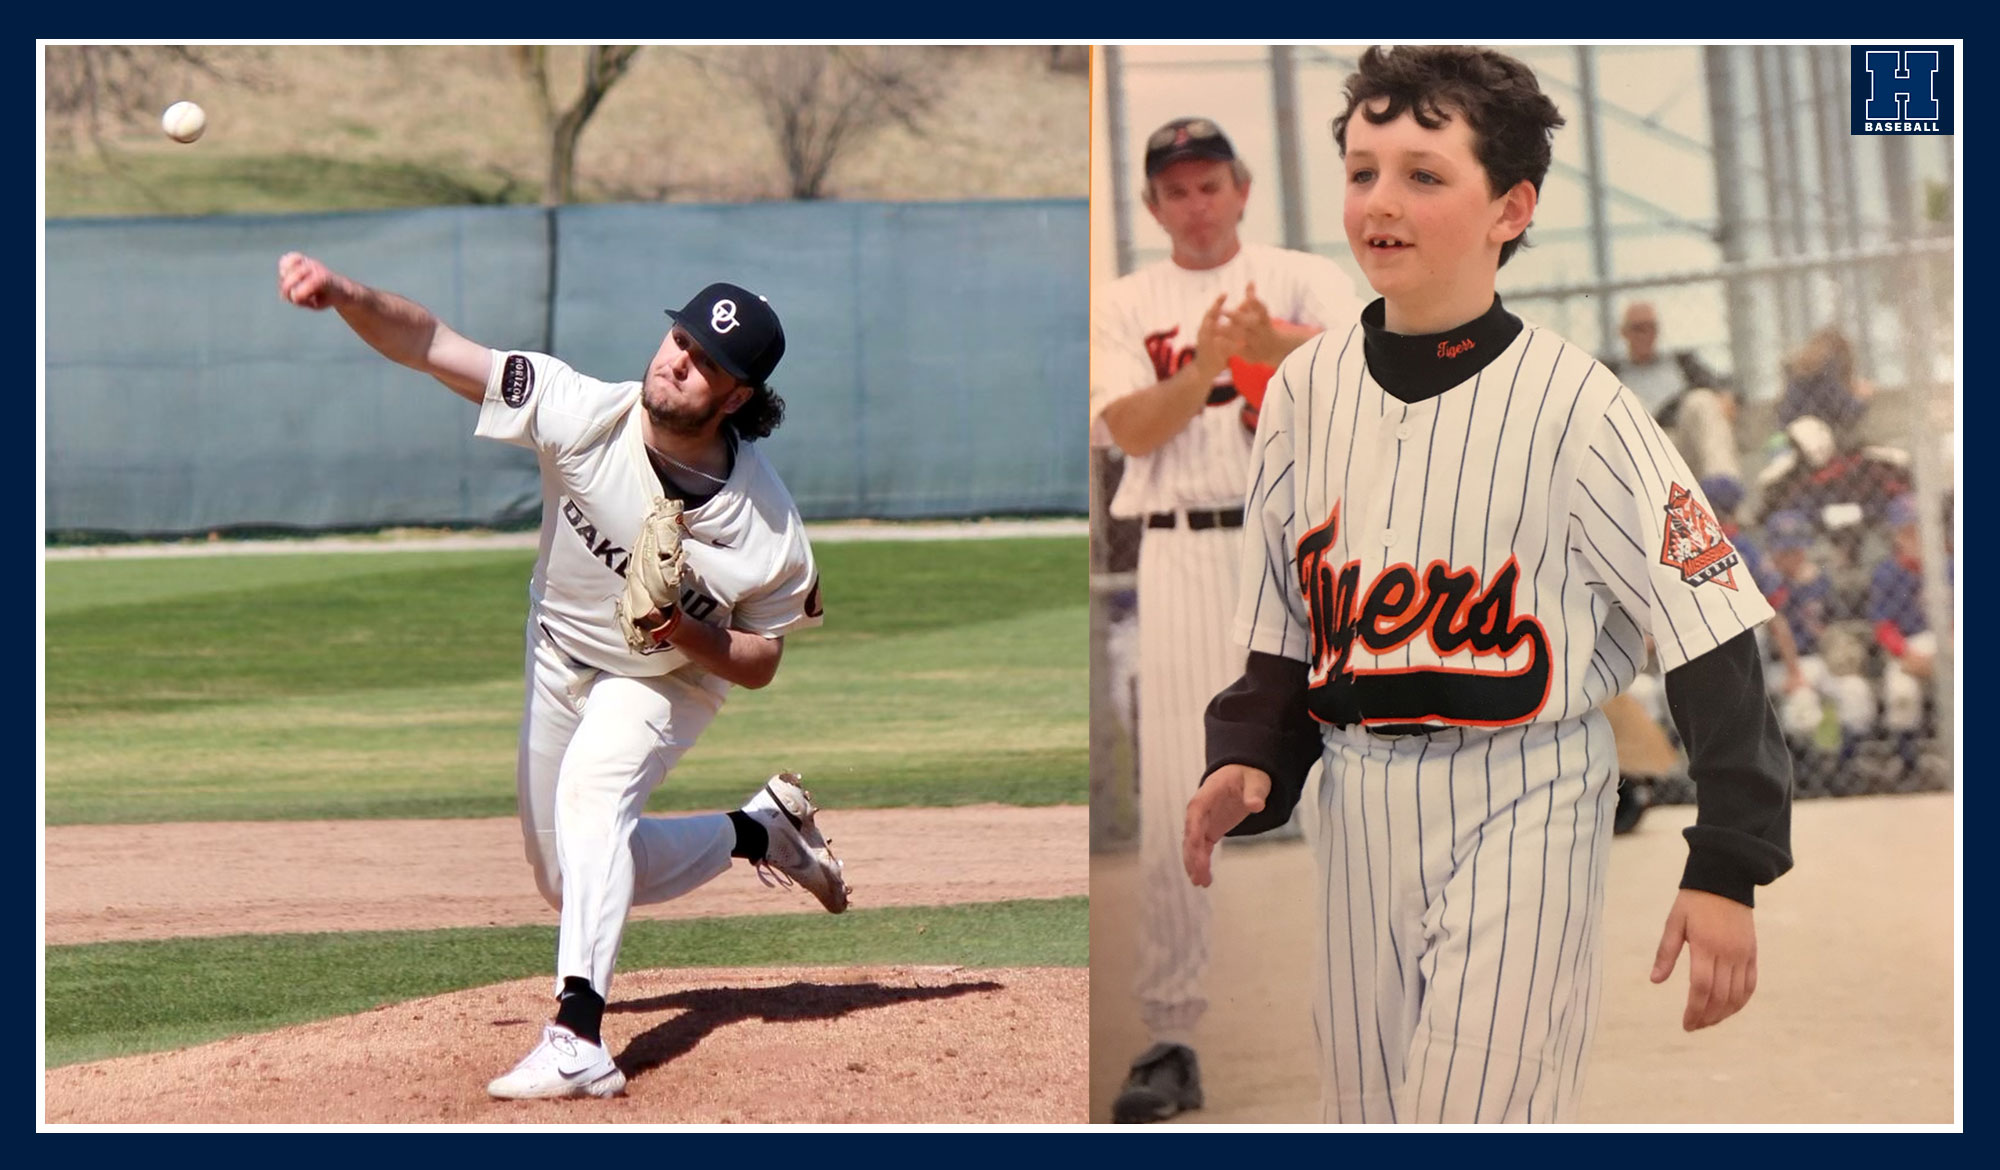 Split screen of Deans pitching at Oakland and as a child playing for the Tigers